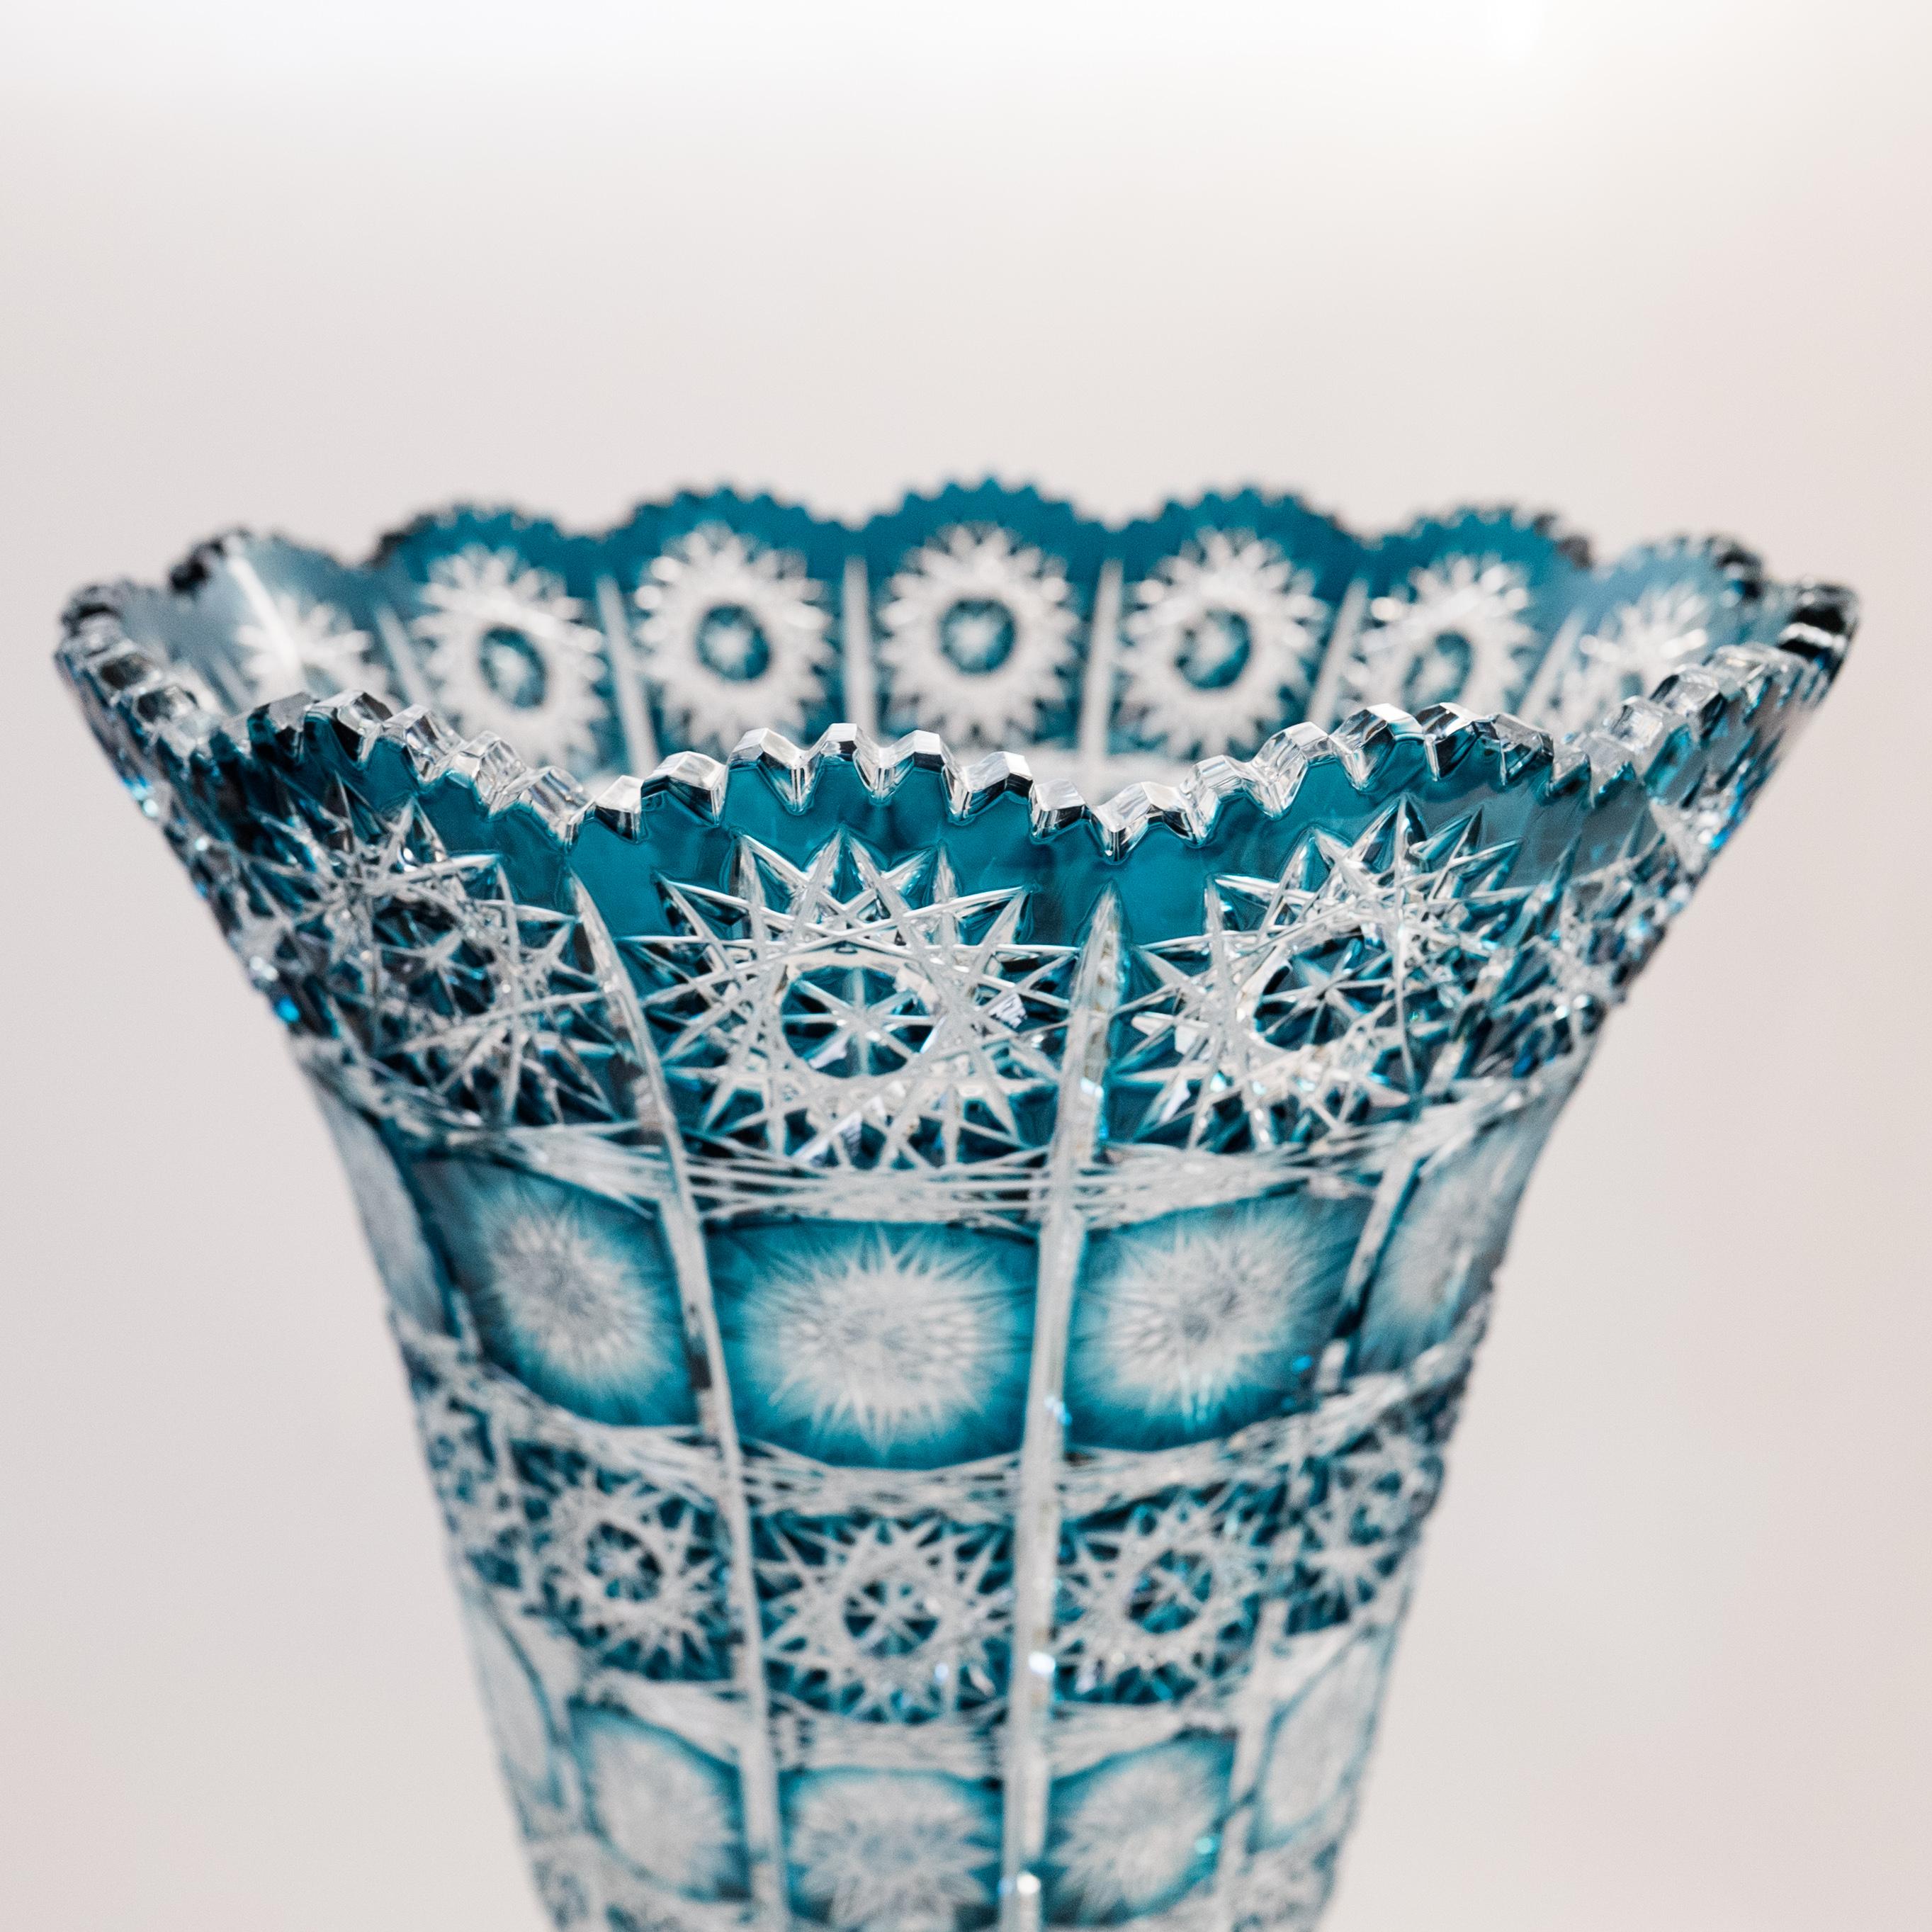 From one of Bohemia's talented art glass companies: Caesar's Crystal, this monumental (and very heavy) crystal vase has been wonderfully and crisply cut in floral and geometric shapes. We love the scalloped shape top and knob stem. The color is